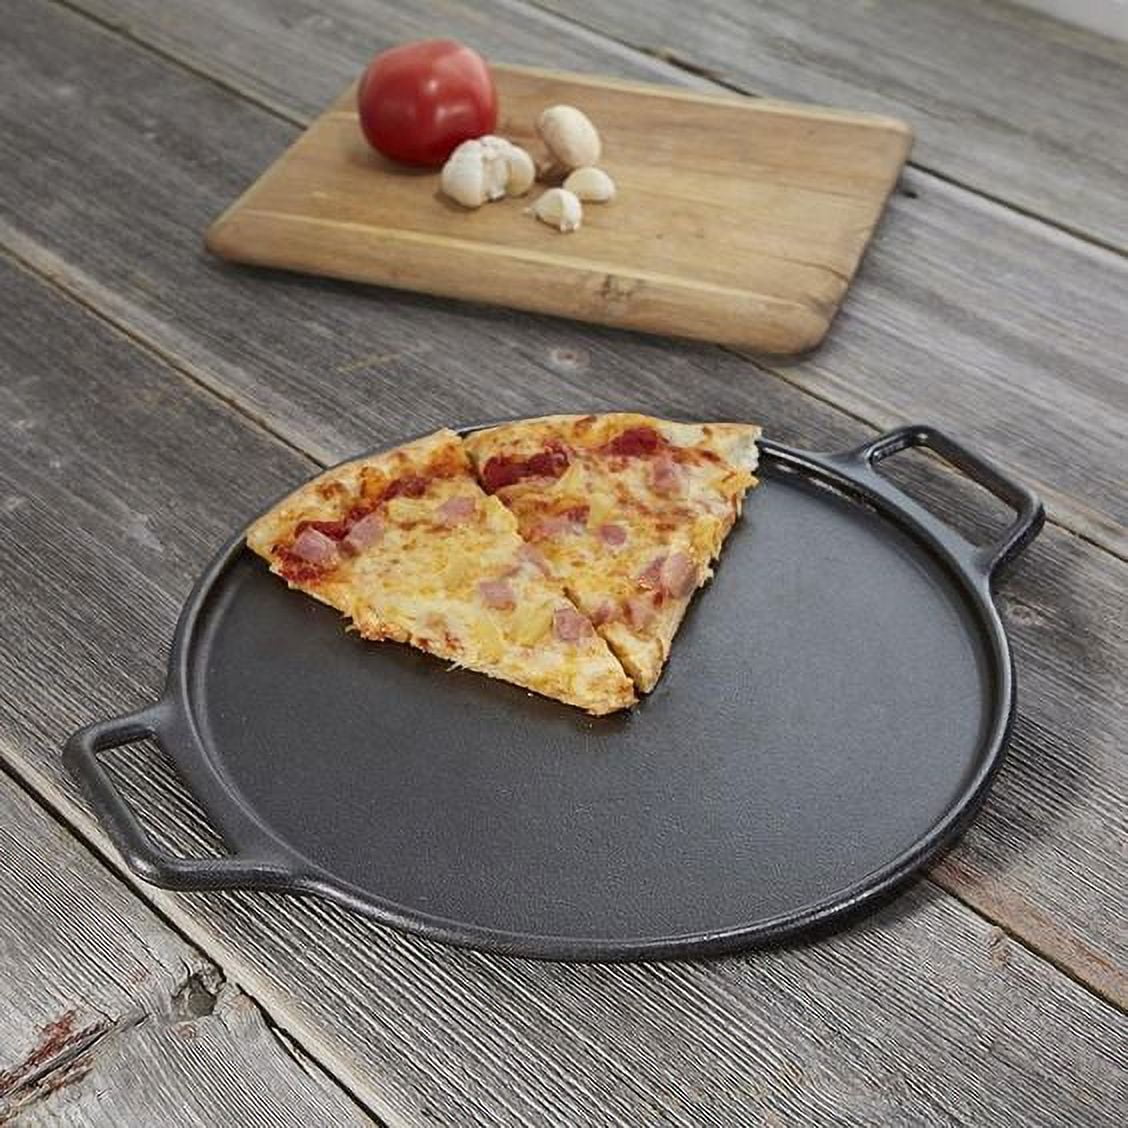 LIVINGBASICS 14-Inch Pre-Seasoned Cast Iron Pizza and Baking Pan with  Handles for oven, stove, BBQ grill, Black - LIVINGbasics®